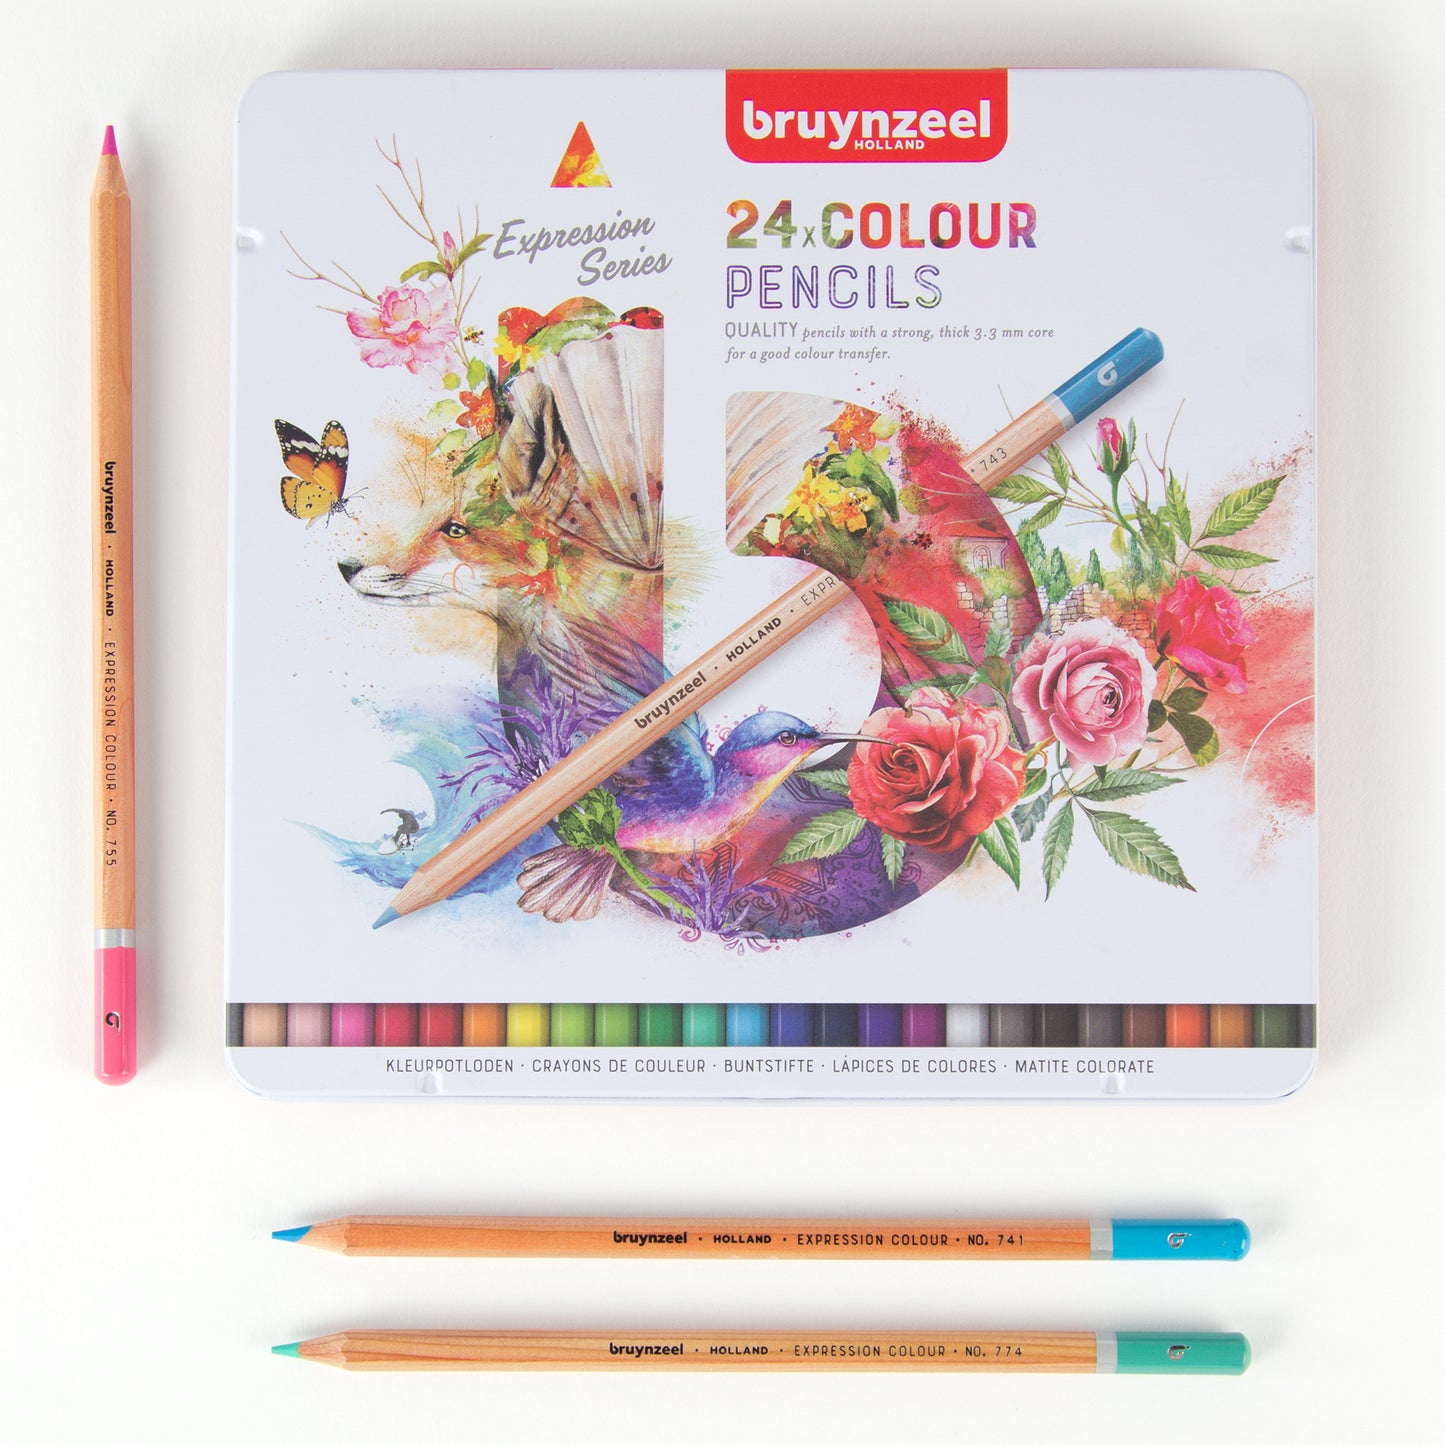 Bruynzeel expression 24 colour pencils tin with pencils - Paper Dream